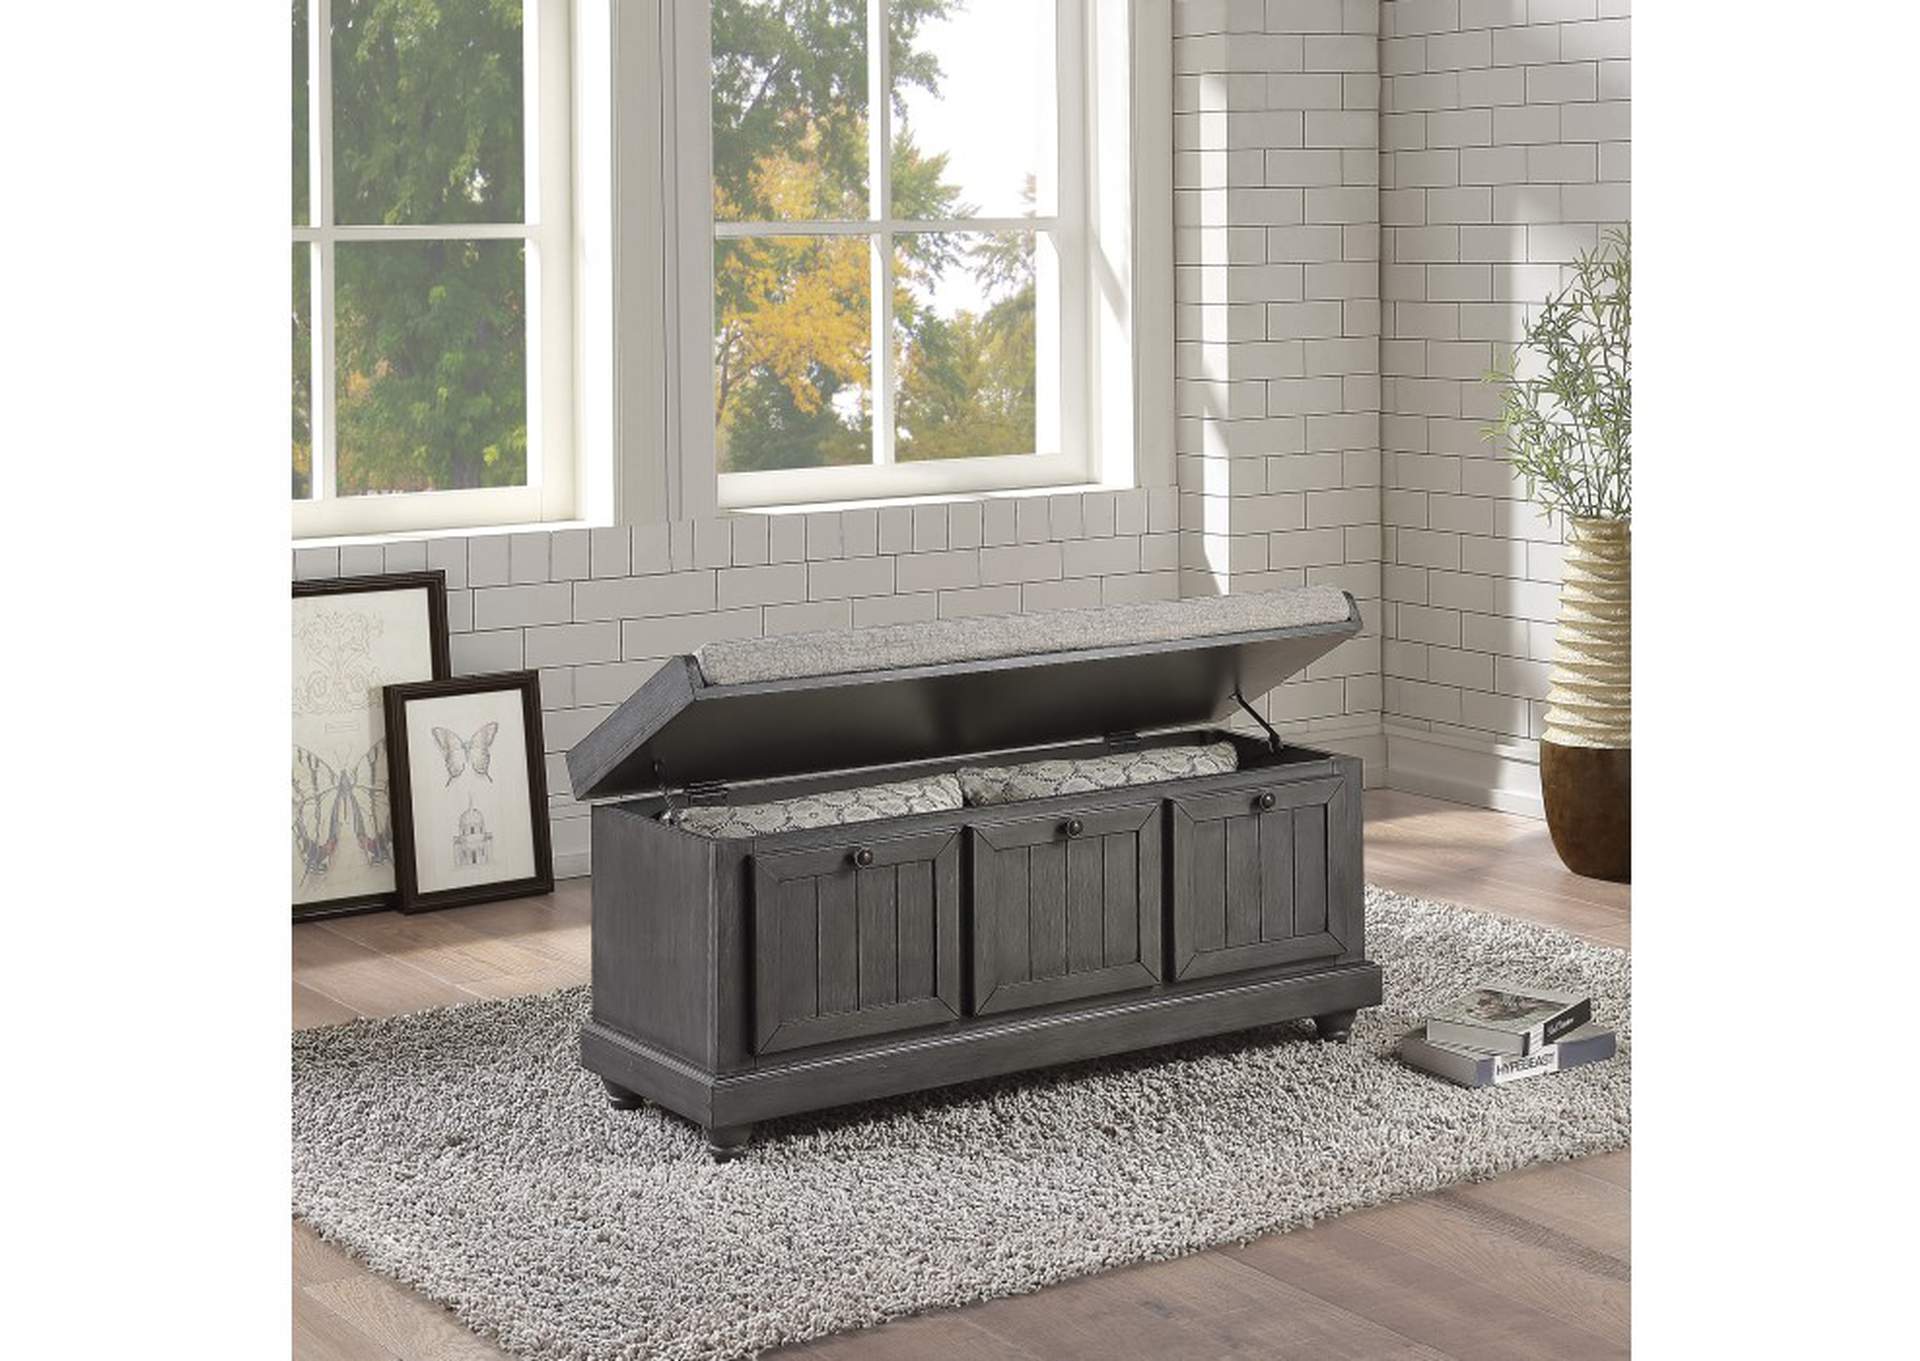 Woodwell Lift Top Storage Bench,Homelegance